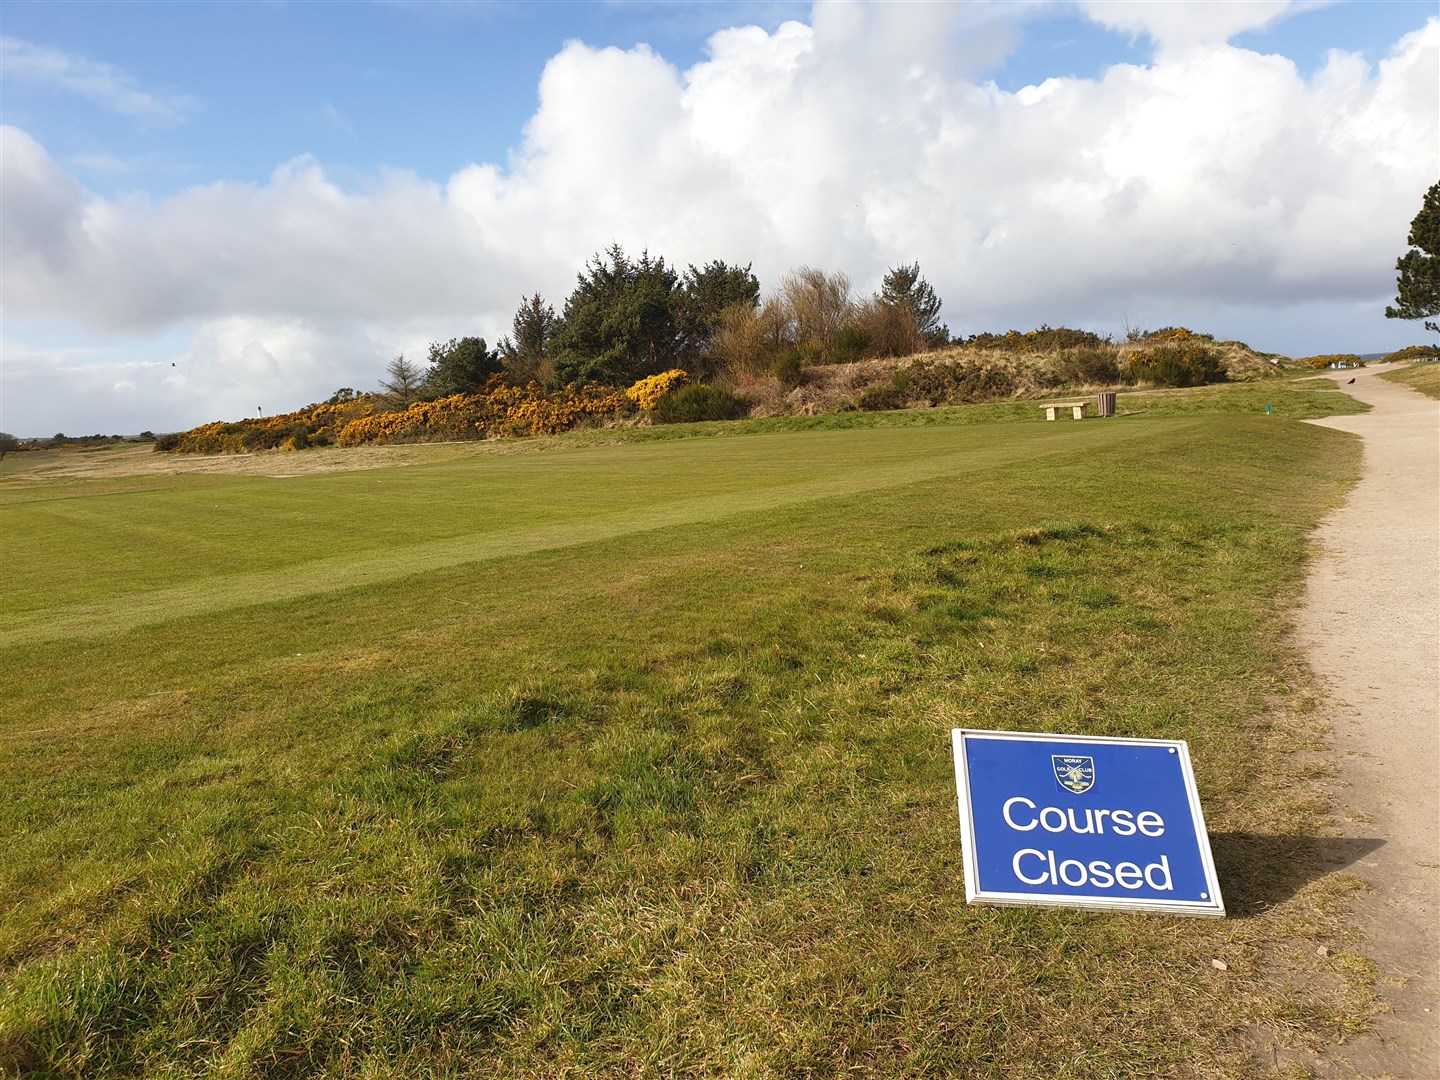 Course closed. Moray Golf Club is closed to golfers at the moment.